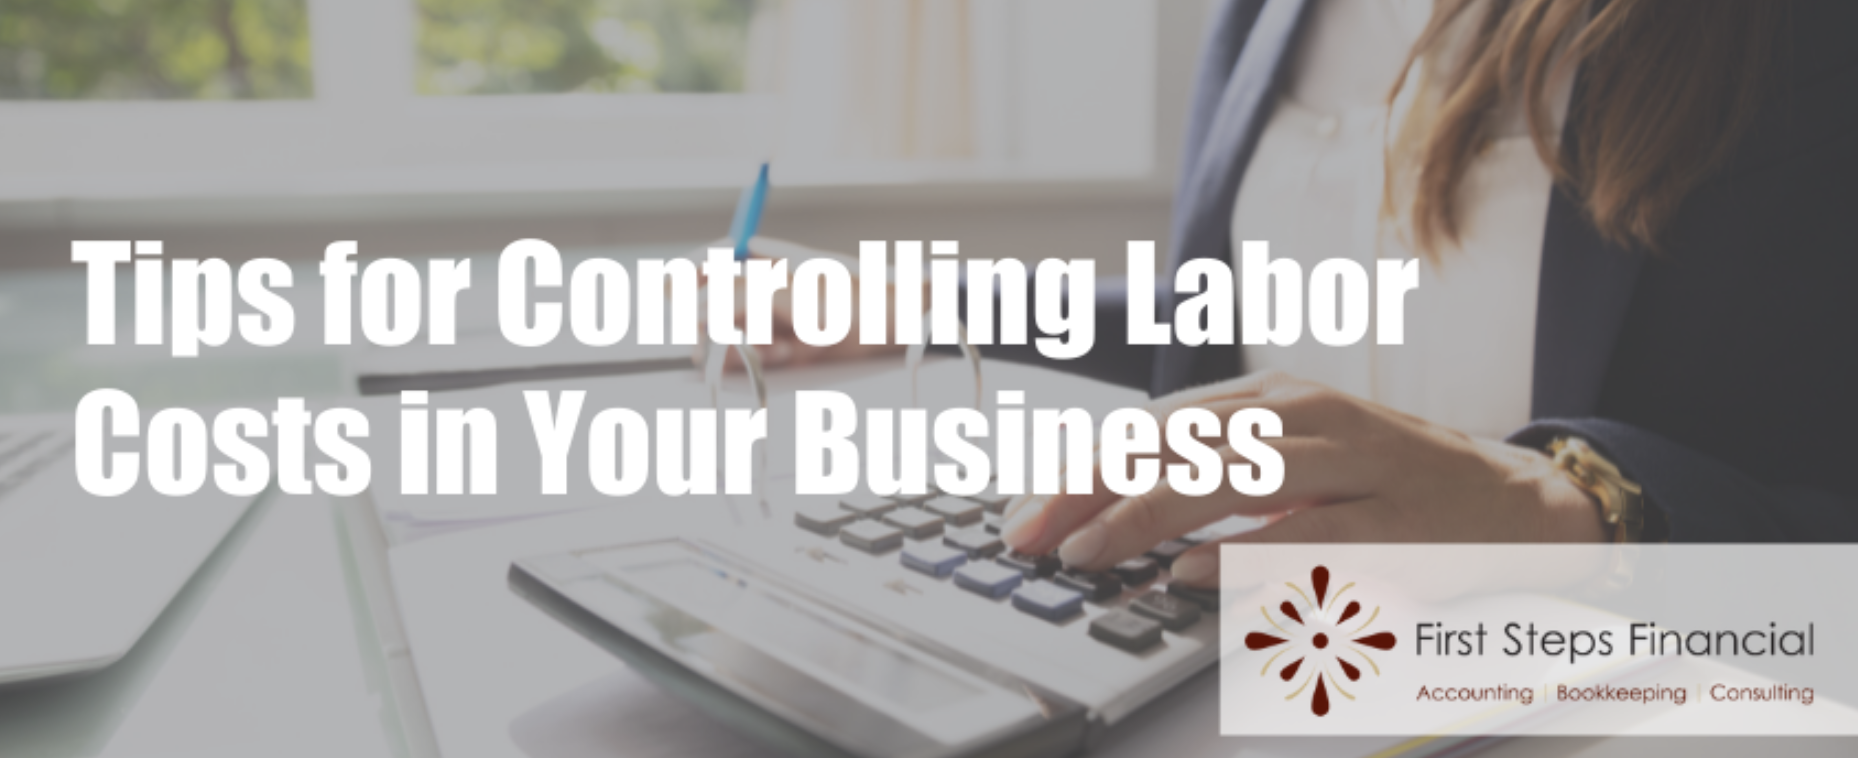 Tips for Controlling Labor Costs in Your Business